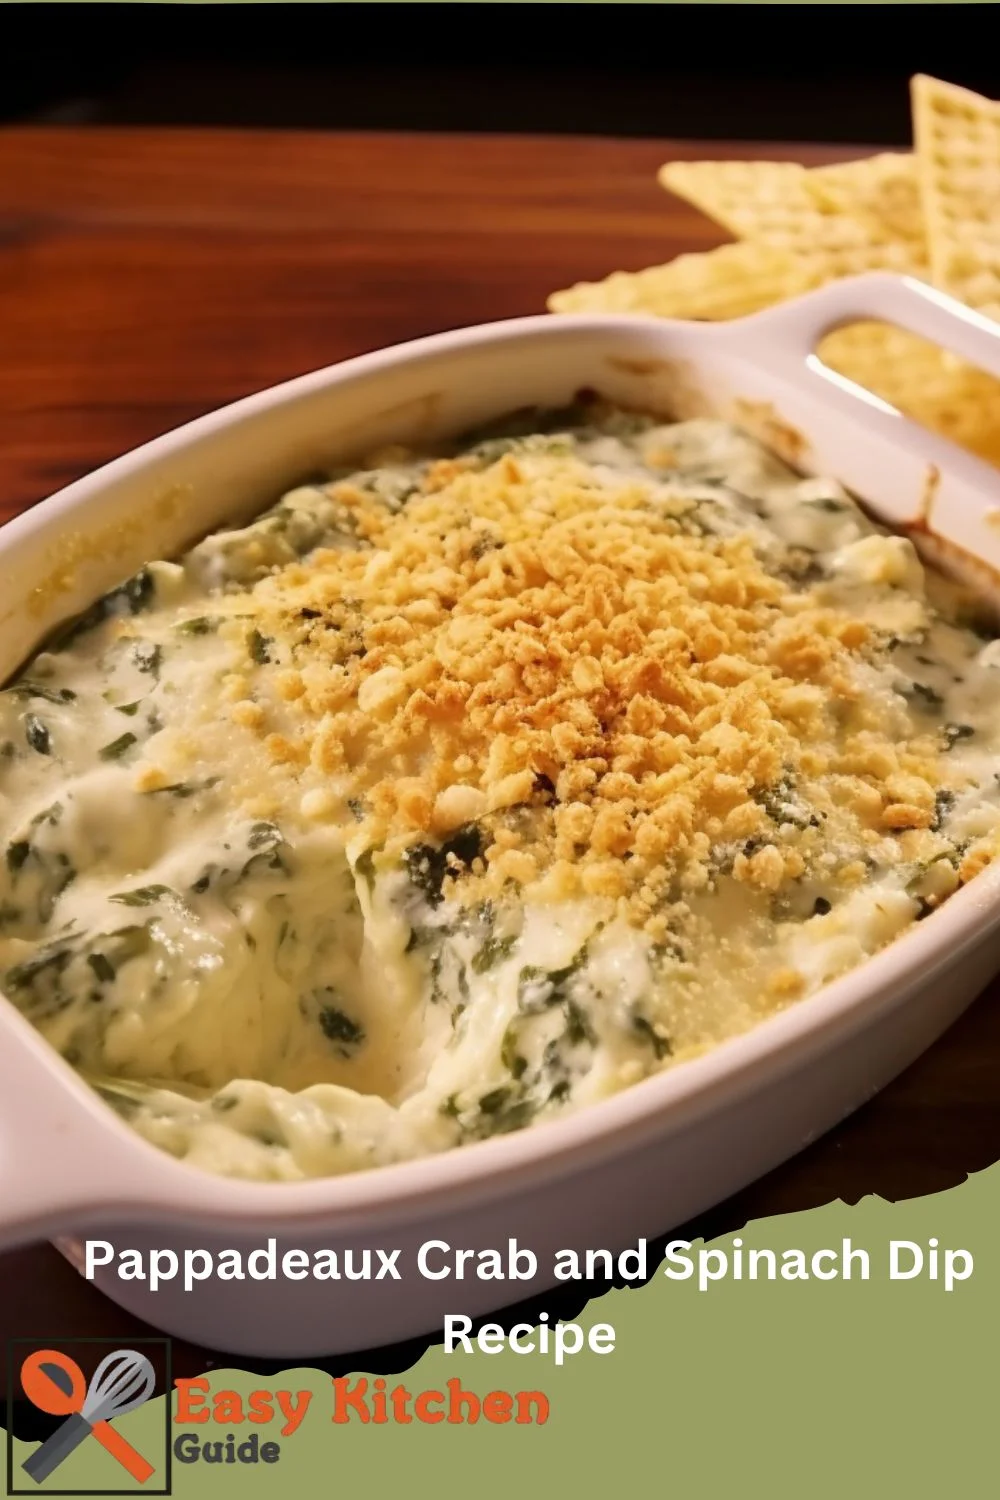 Pappadeaux Crab and Spinach Dip Recipe